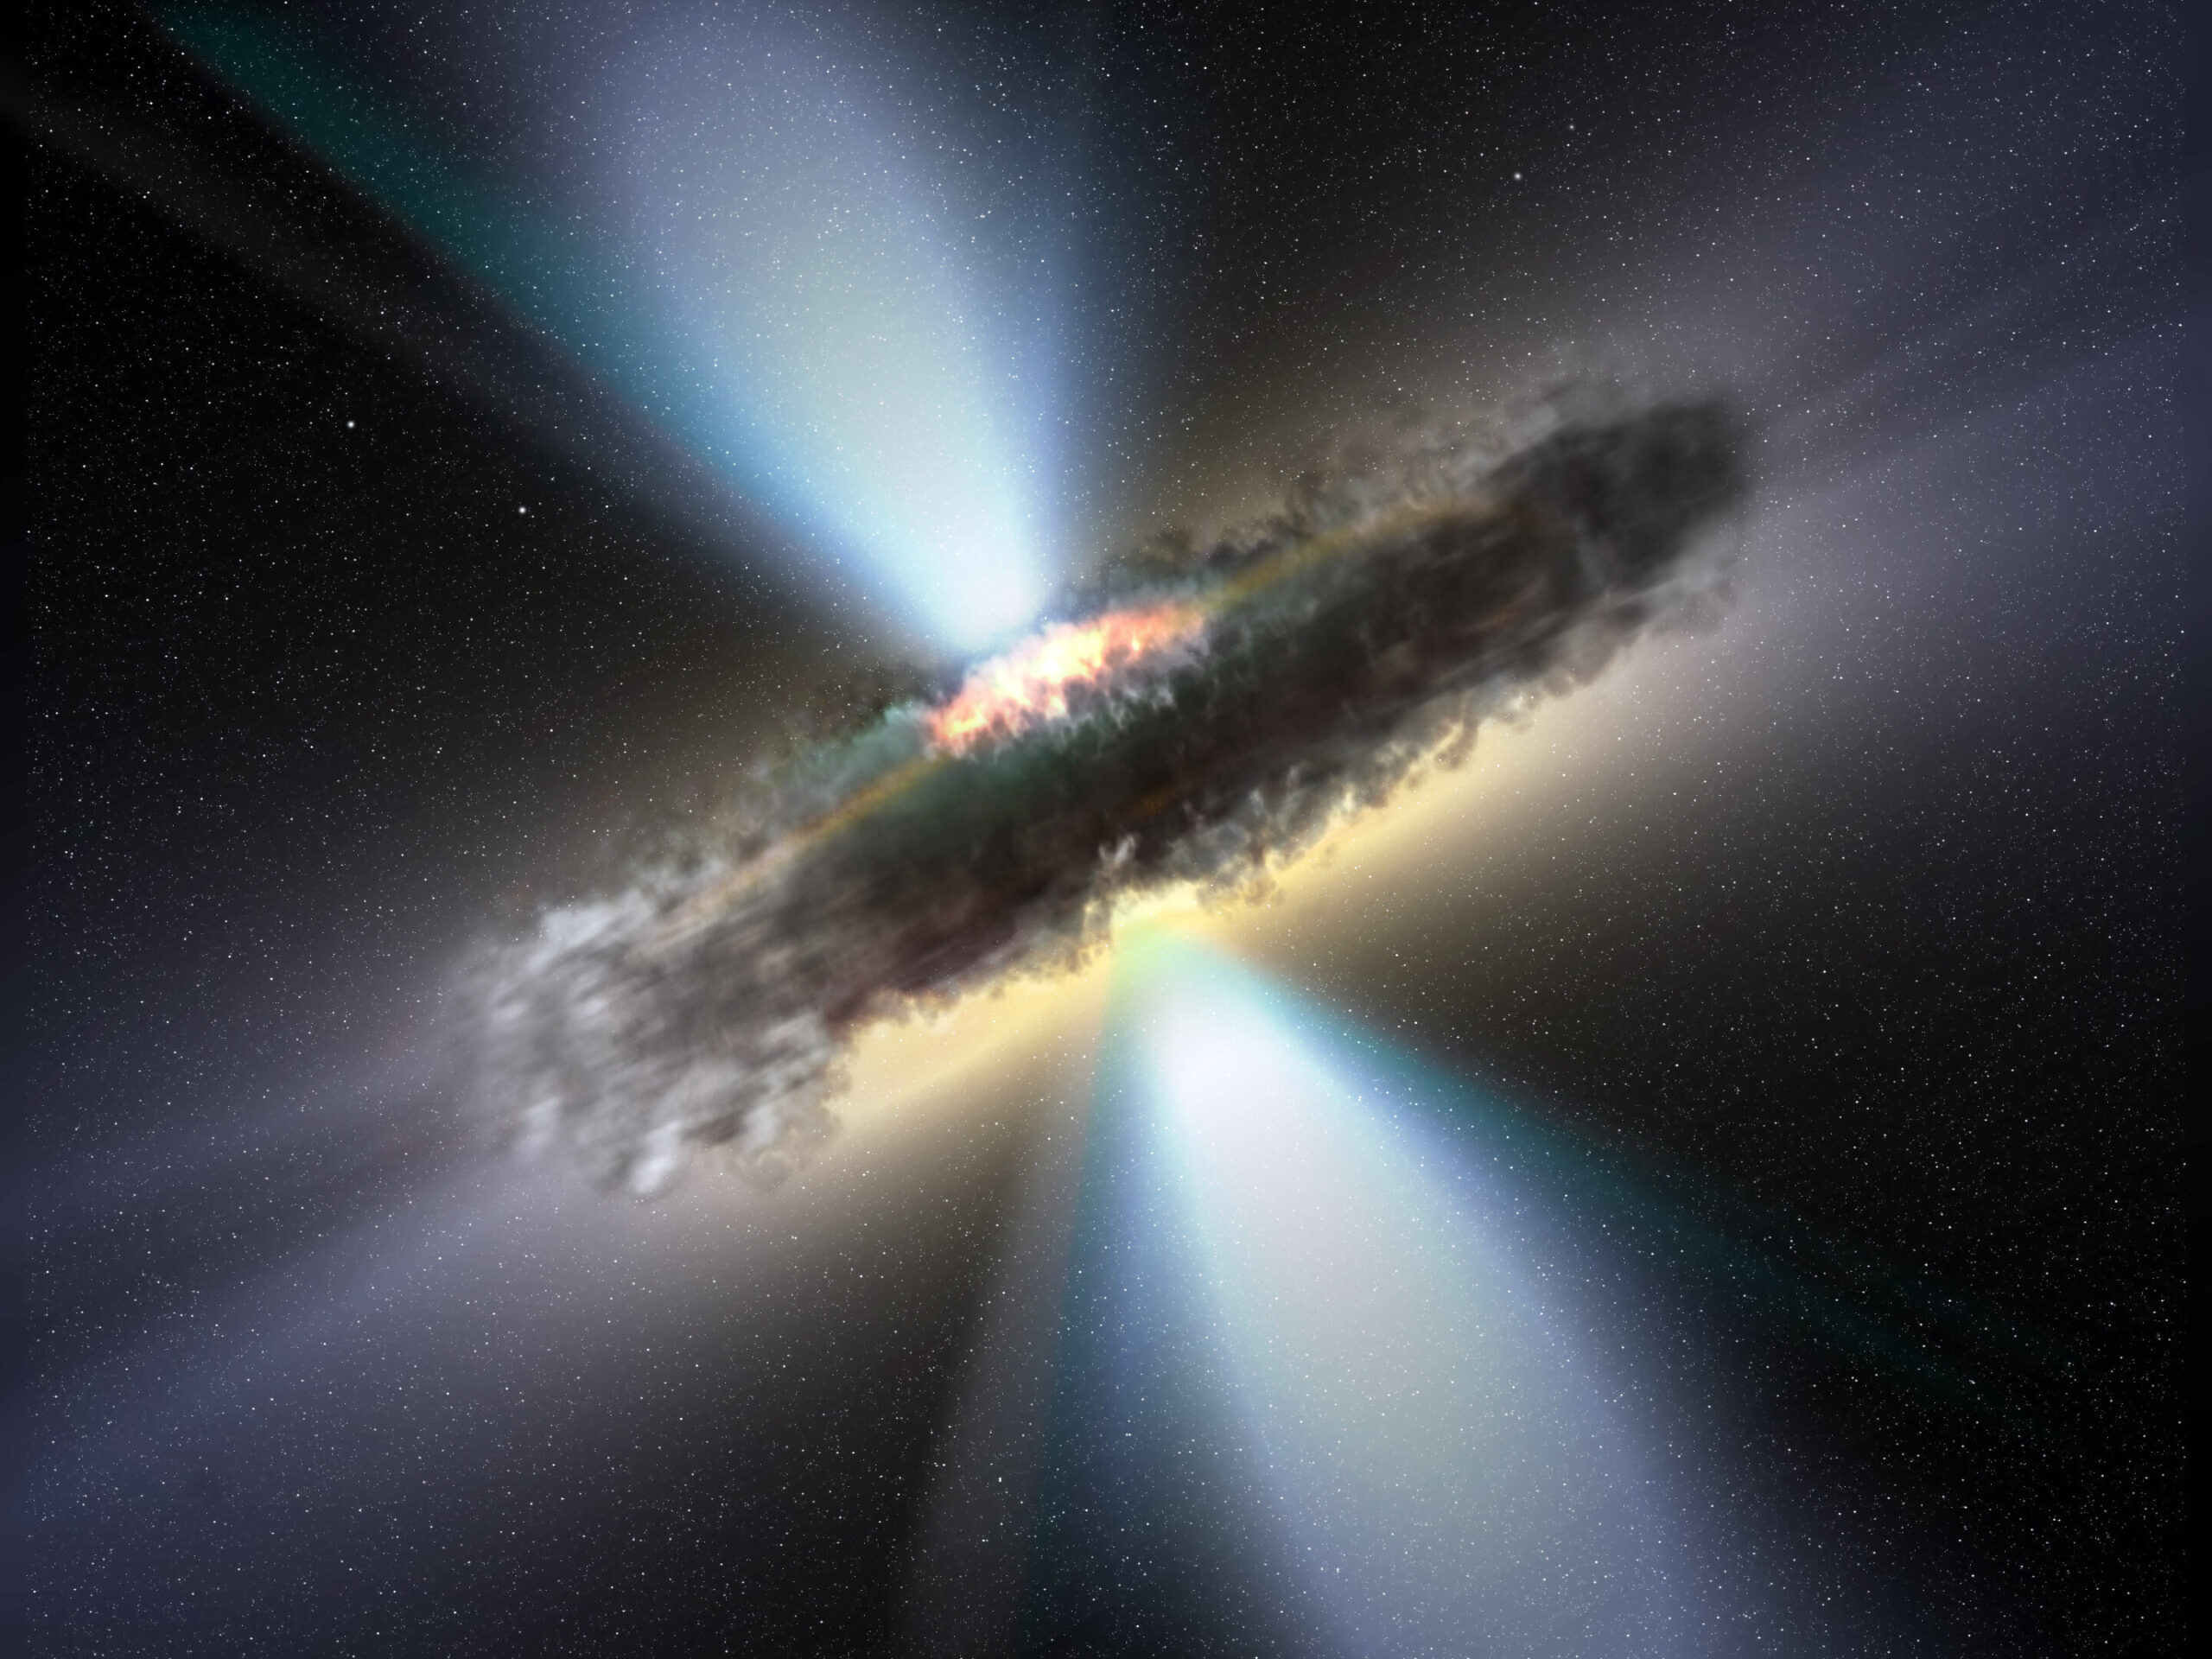 New research shows quasars may be buried in their host galaxies